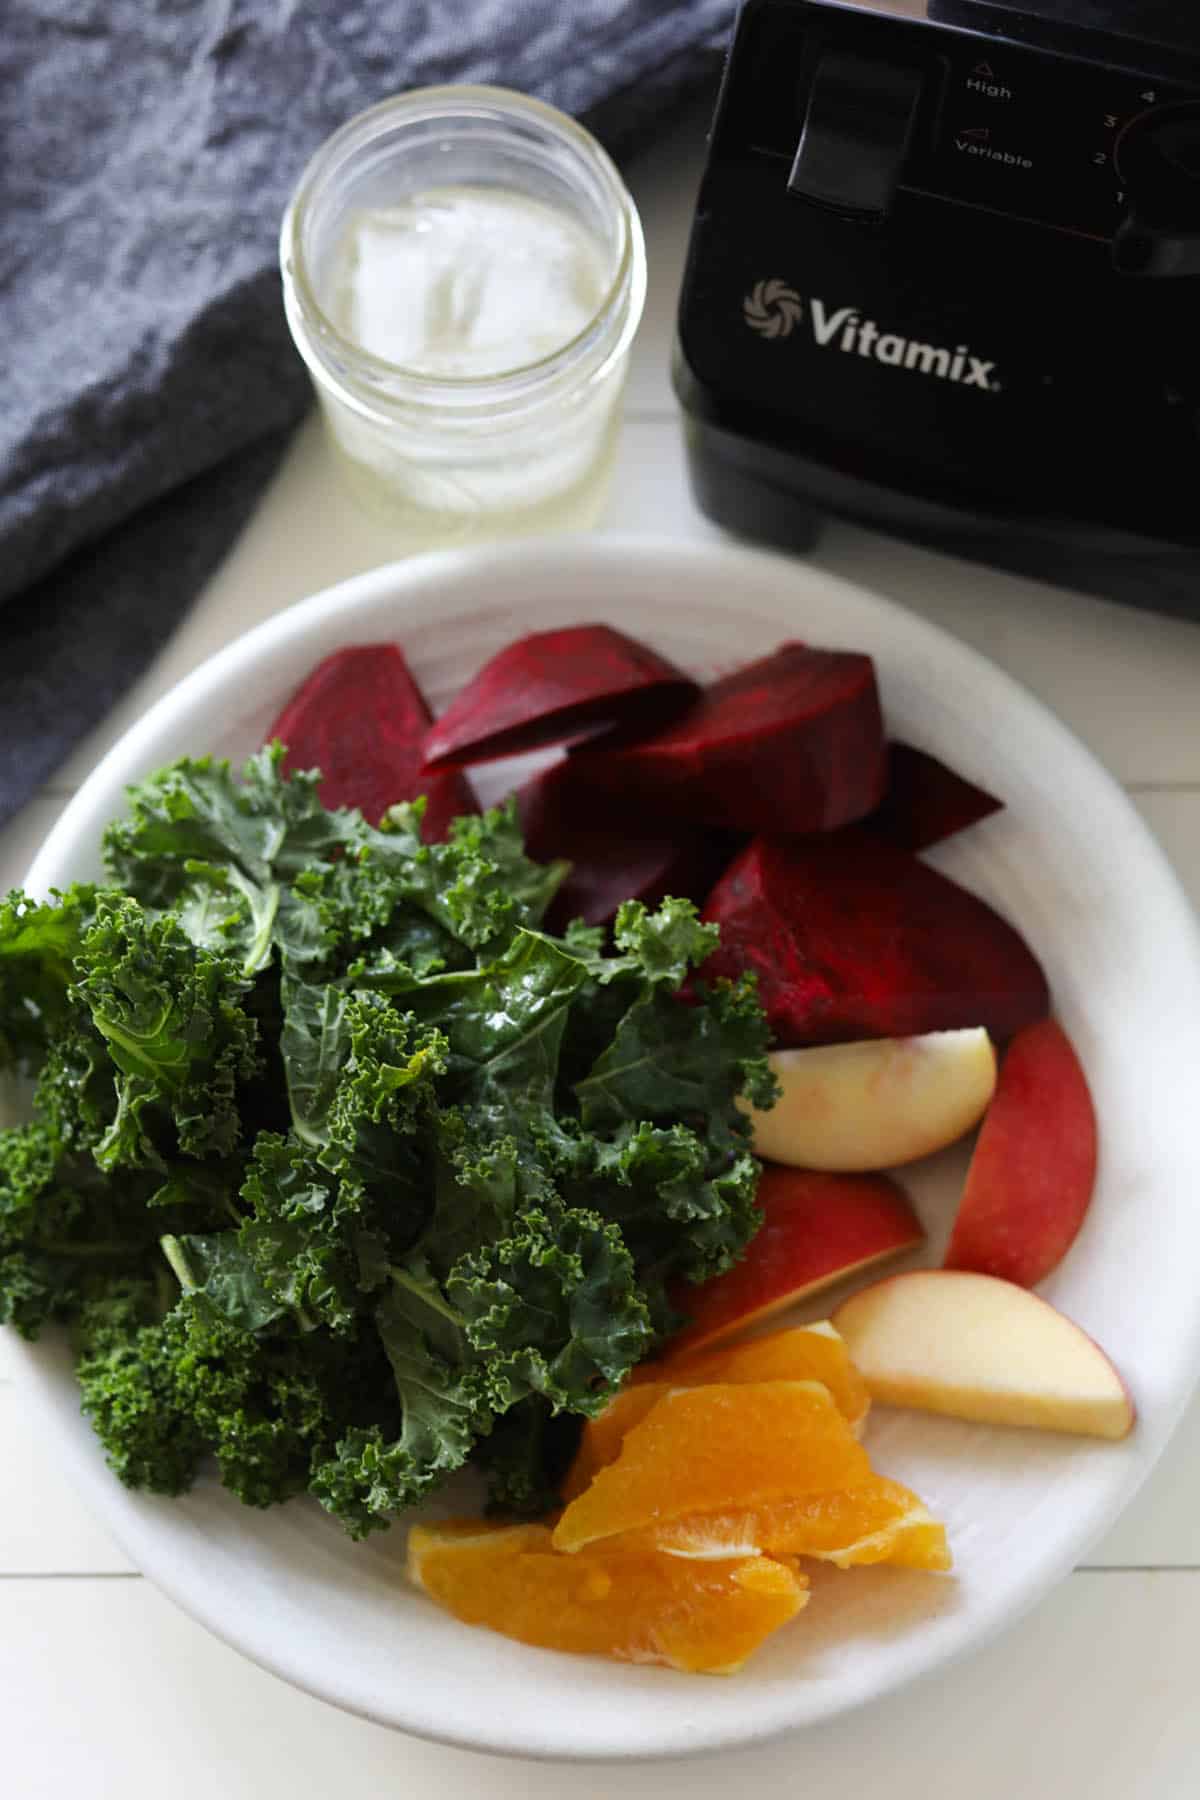 Image of blender in background and cup of ice and clear liquid. Plate of chopped green kale, cut red beet, apple and orange slices.